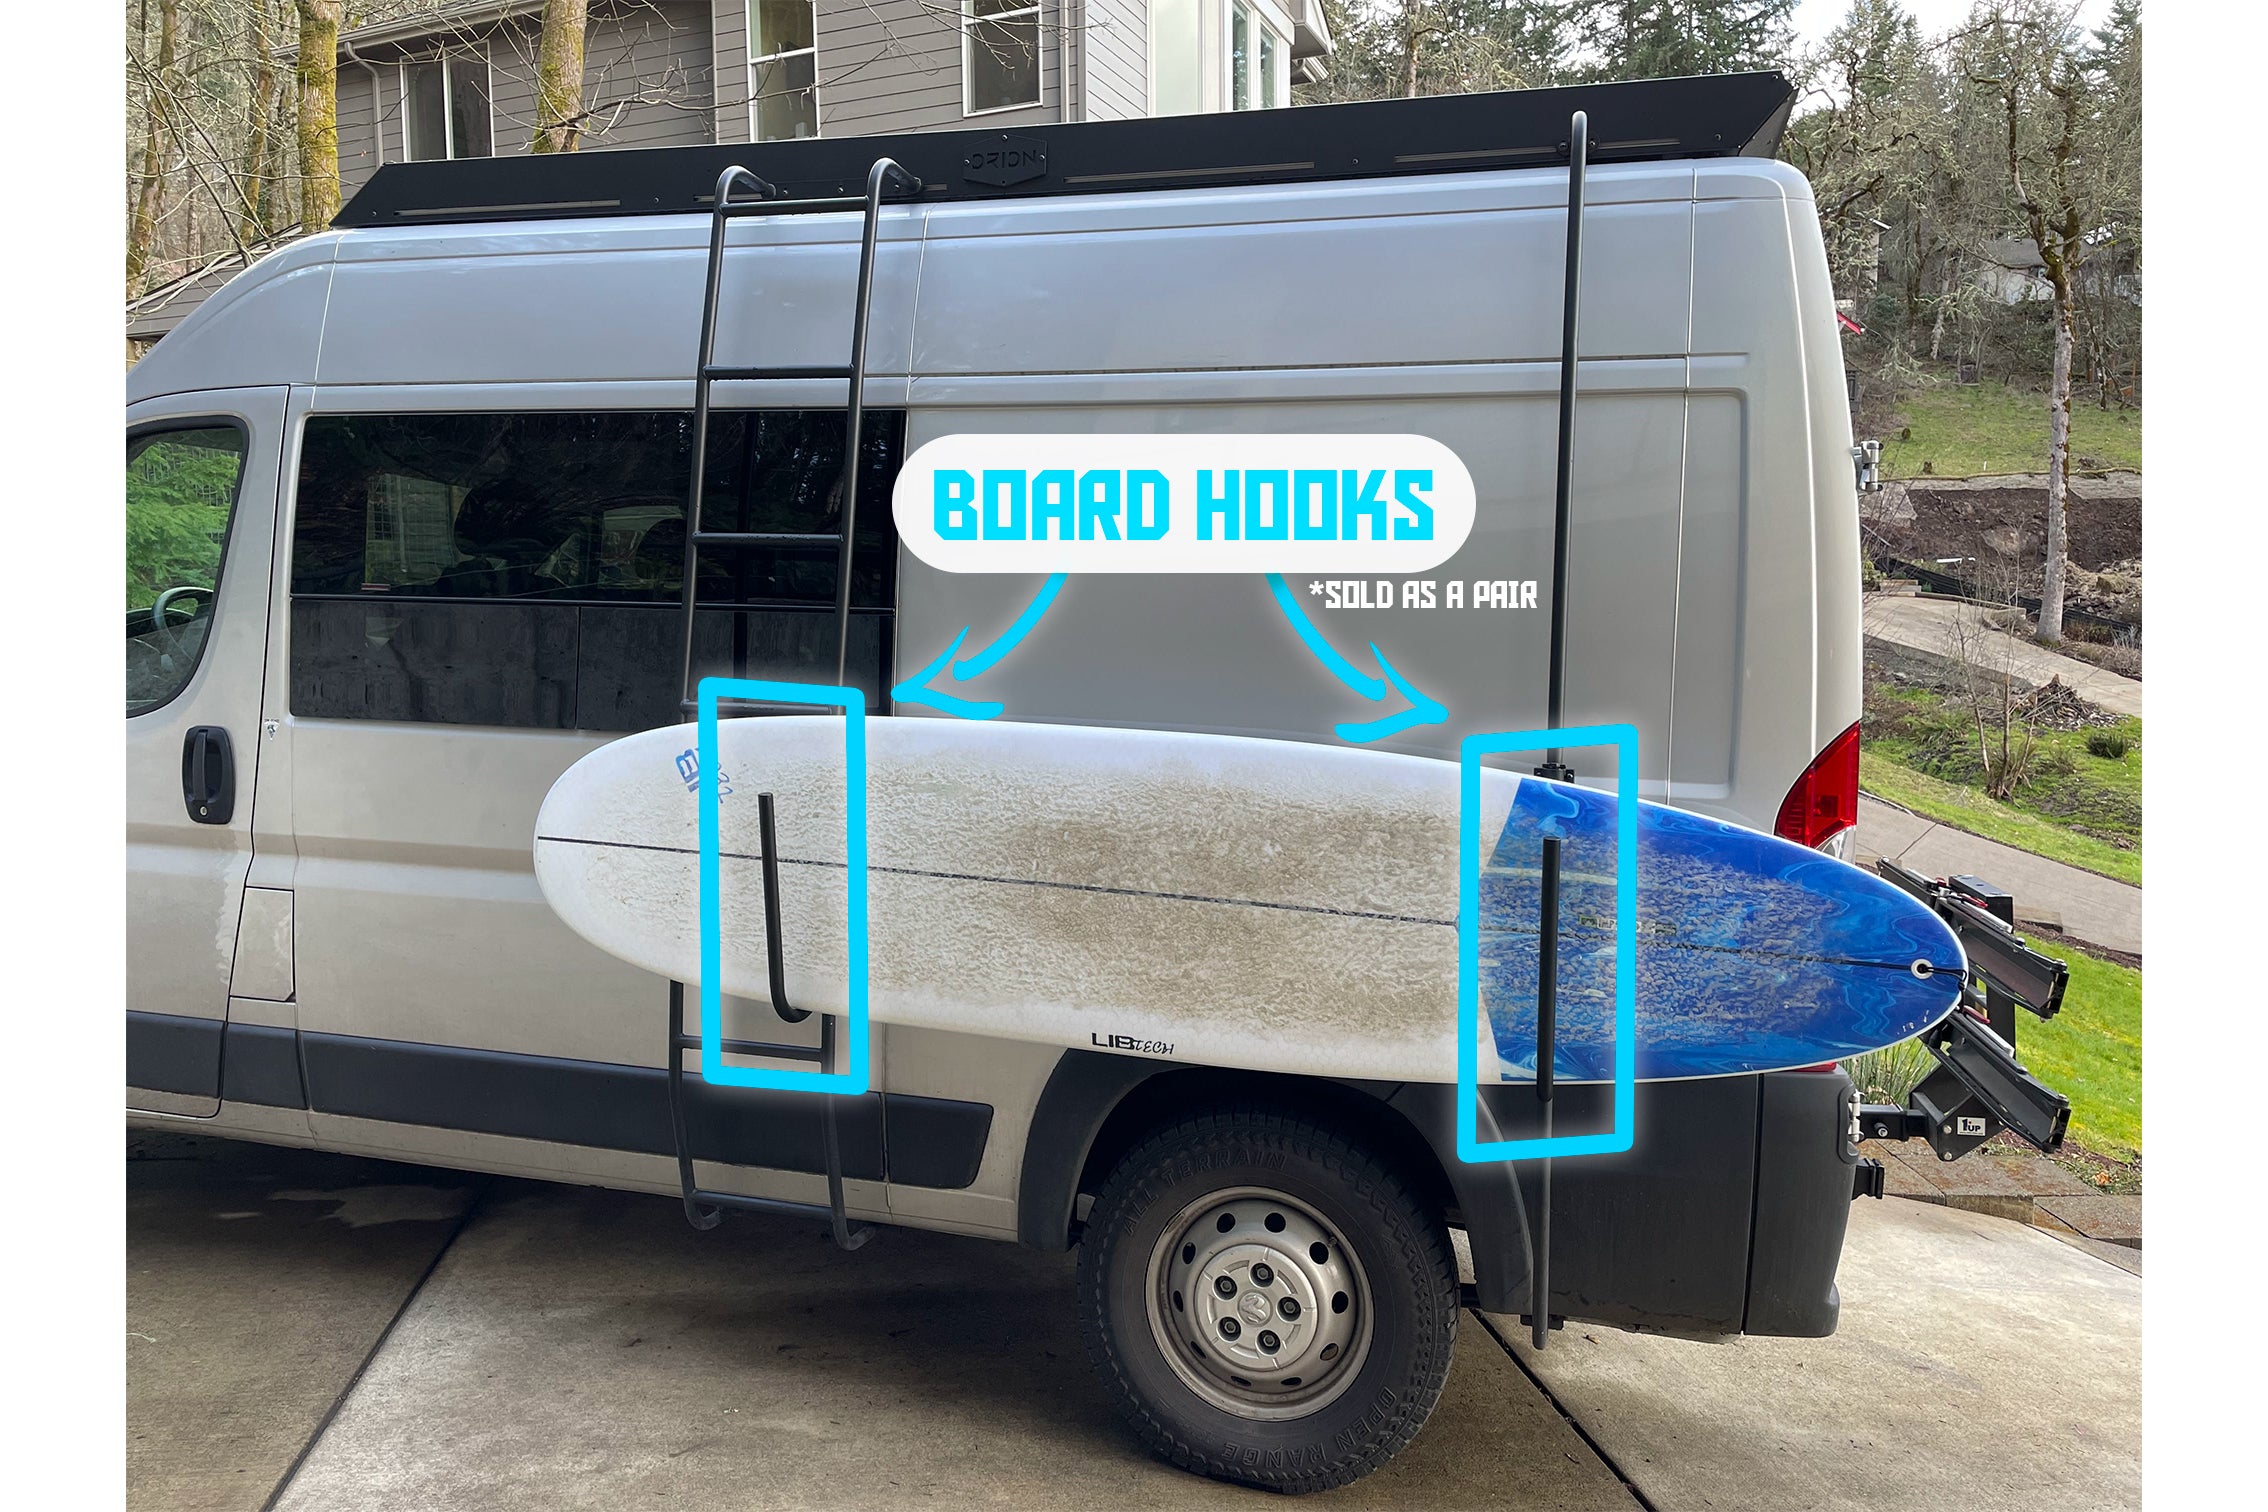 A surf board on the side of a van using Orion van gear products